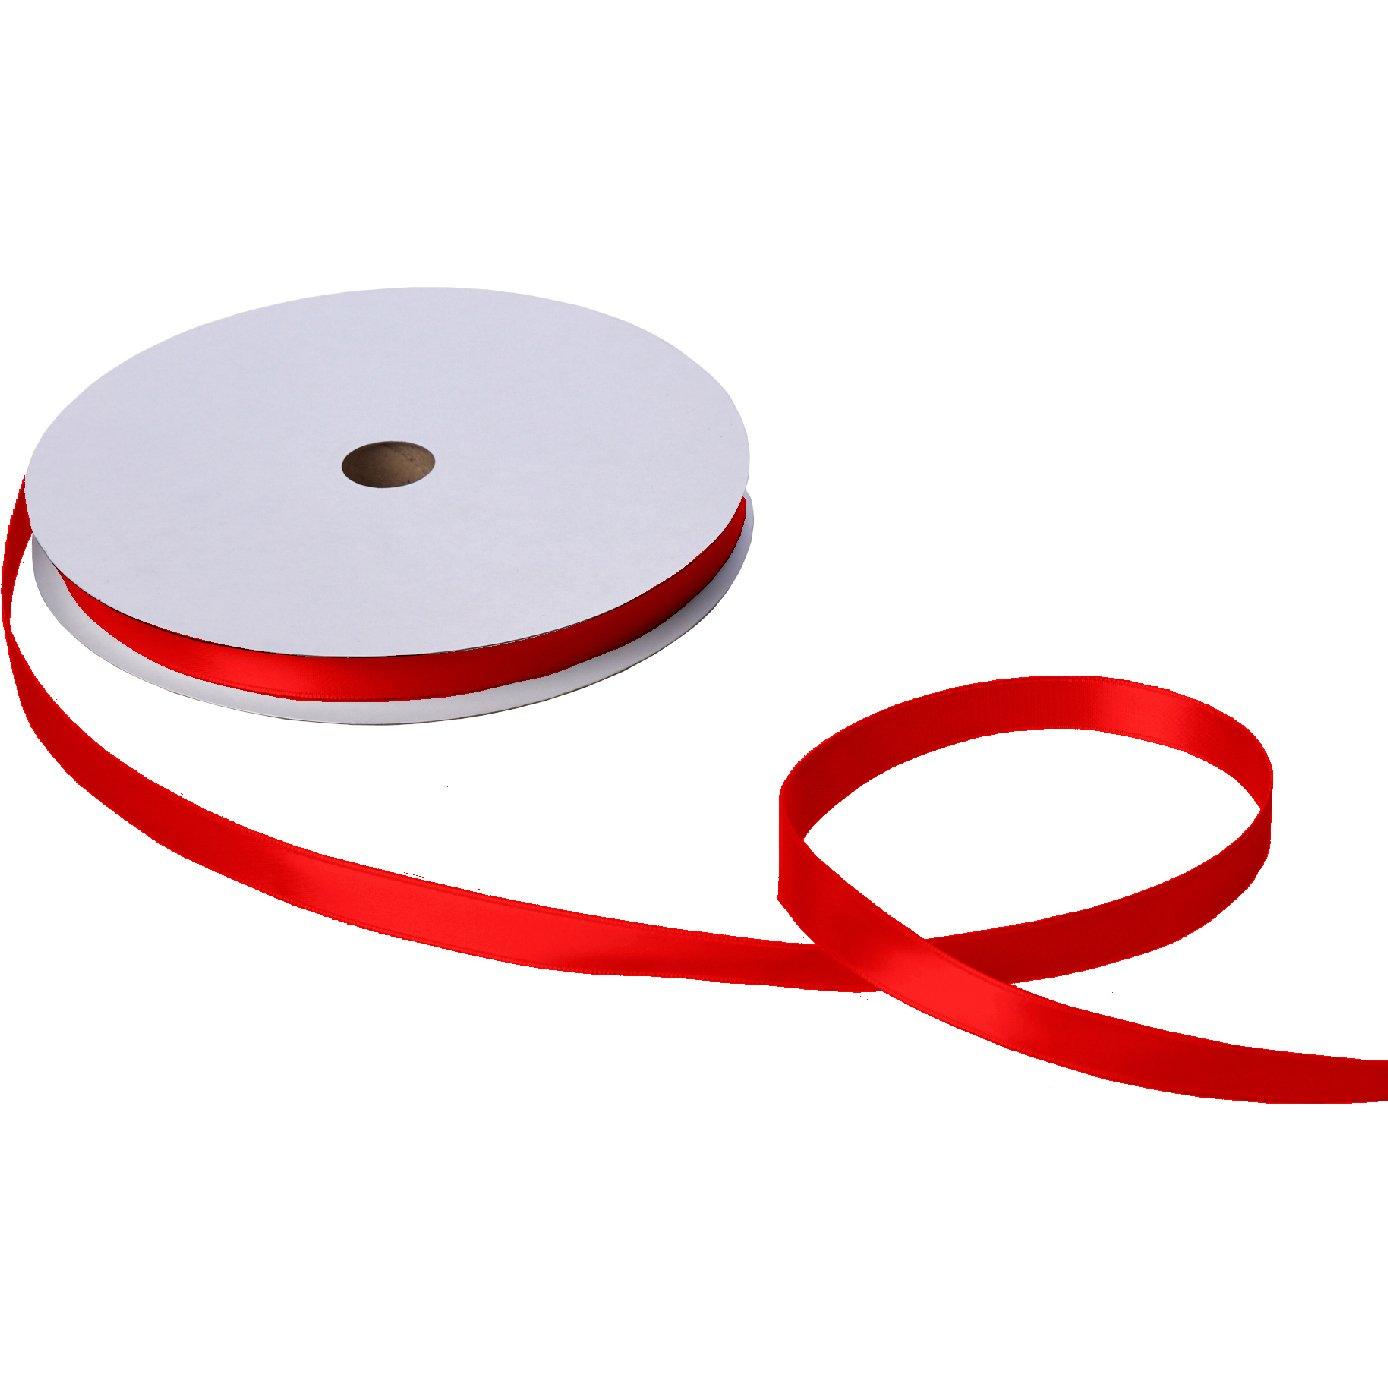 Jillson & Roberts Double-Faced Satin Ribbon, 5/8" Wide x 100 Yards, Red by Present Paper - Vysn